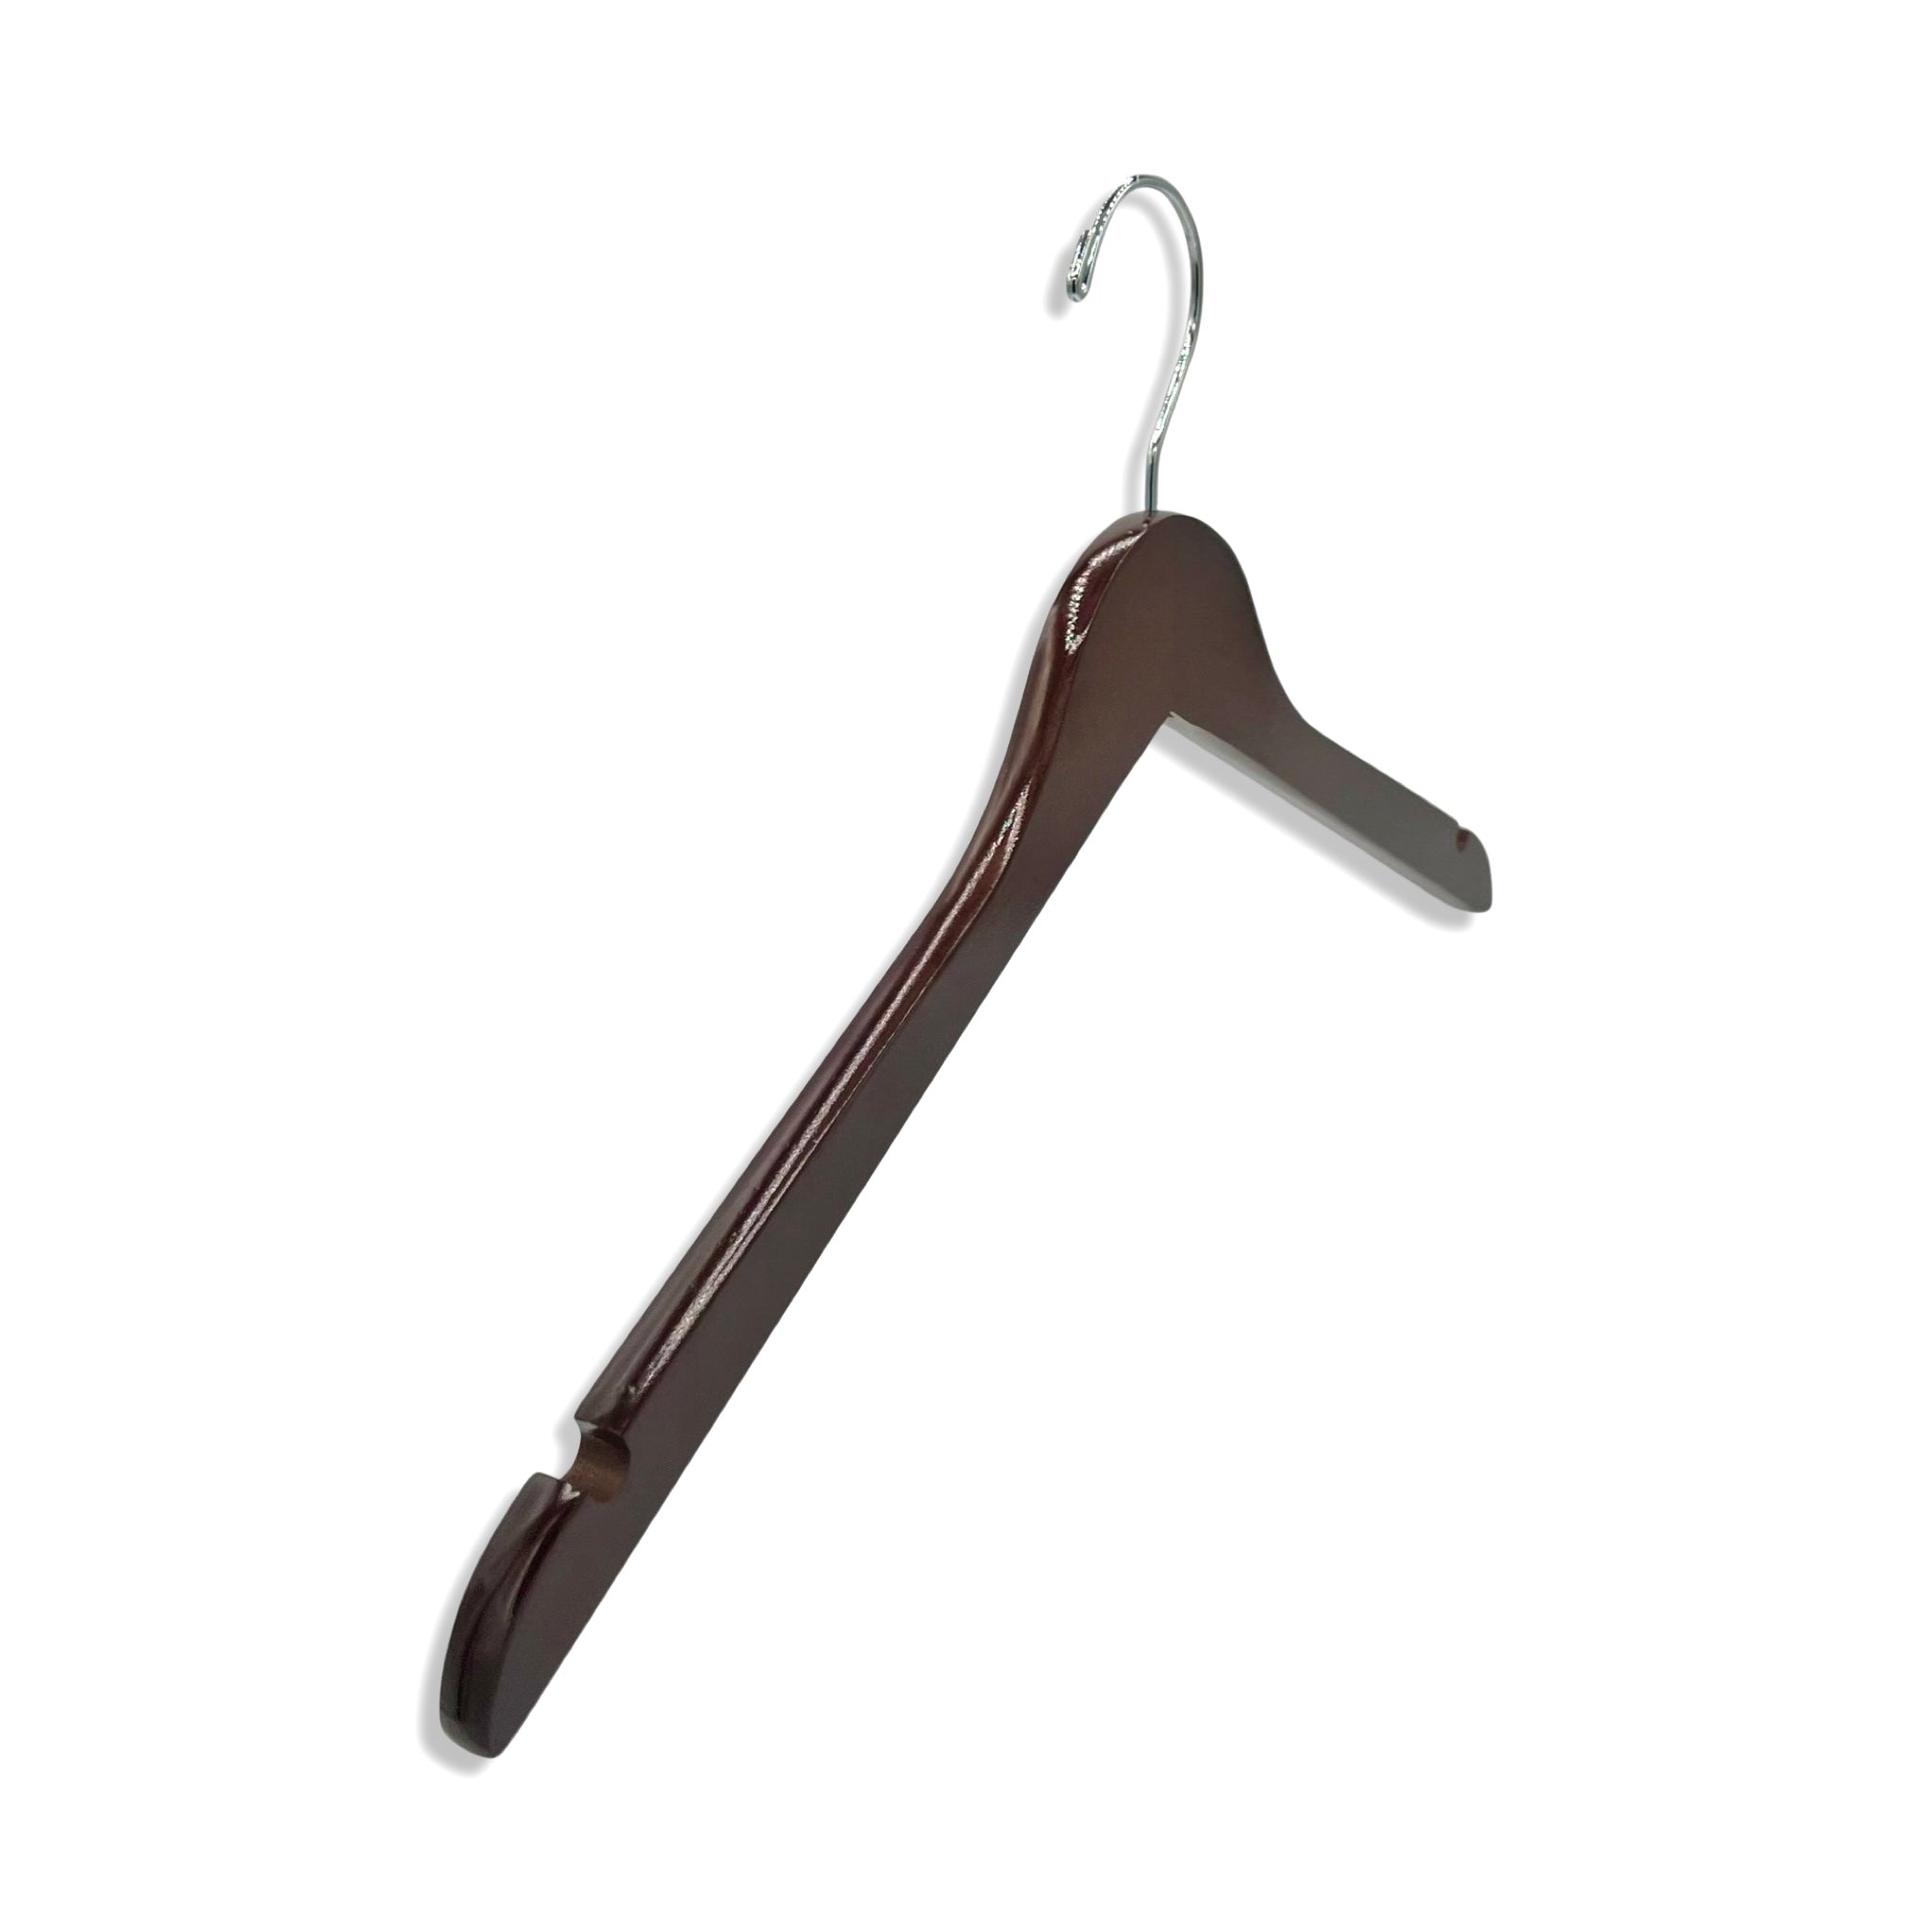 A Royal Hangers Dark Walnut Wood Top Hanger for adults with a silver hook and shoulder notches for closets and stores